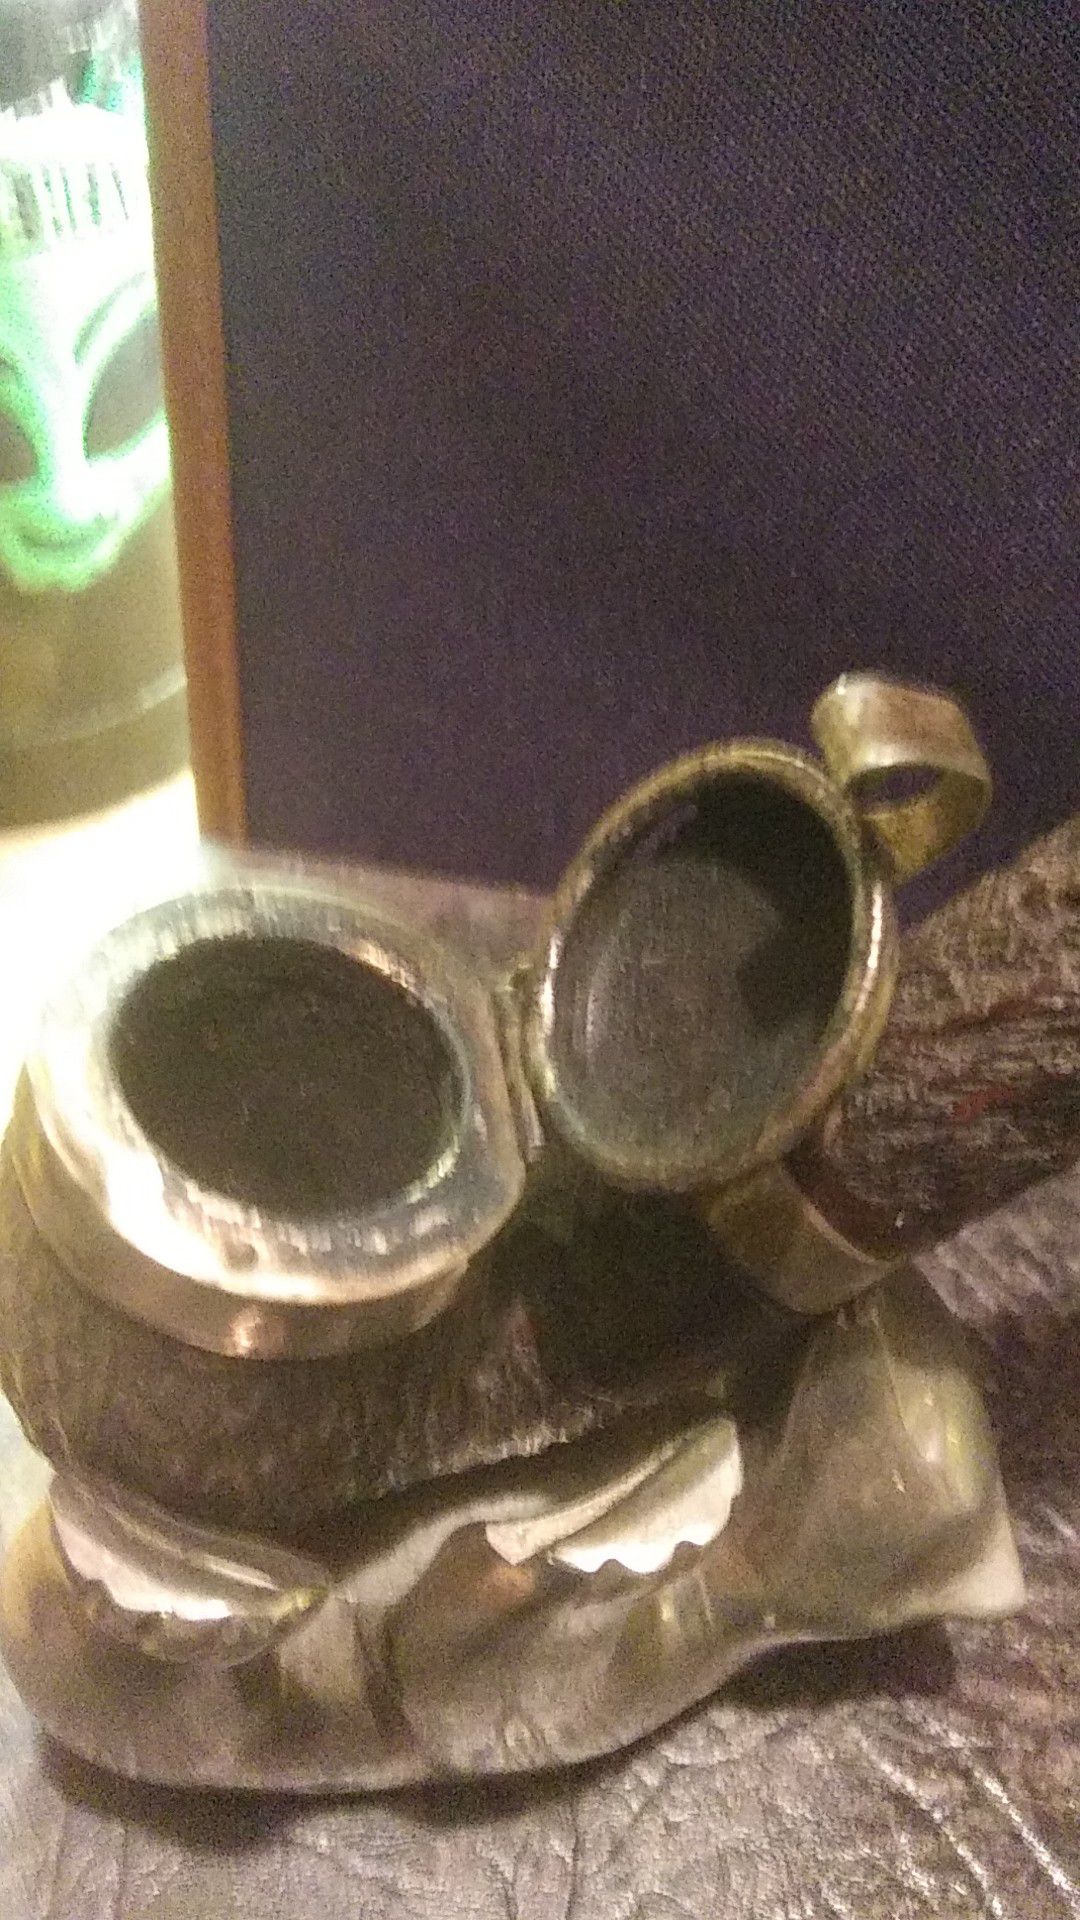 Vintage looking smokers pipe with holder